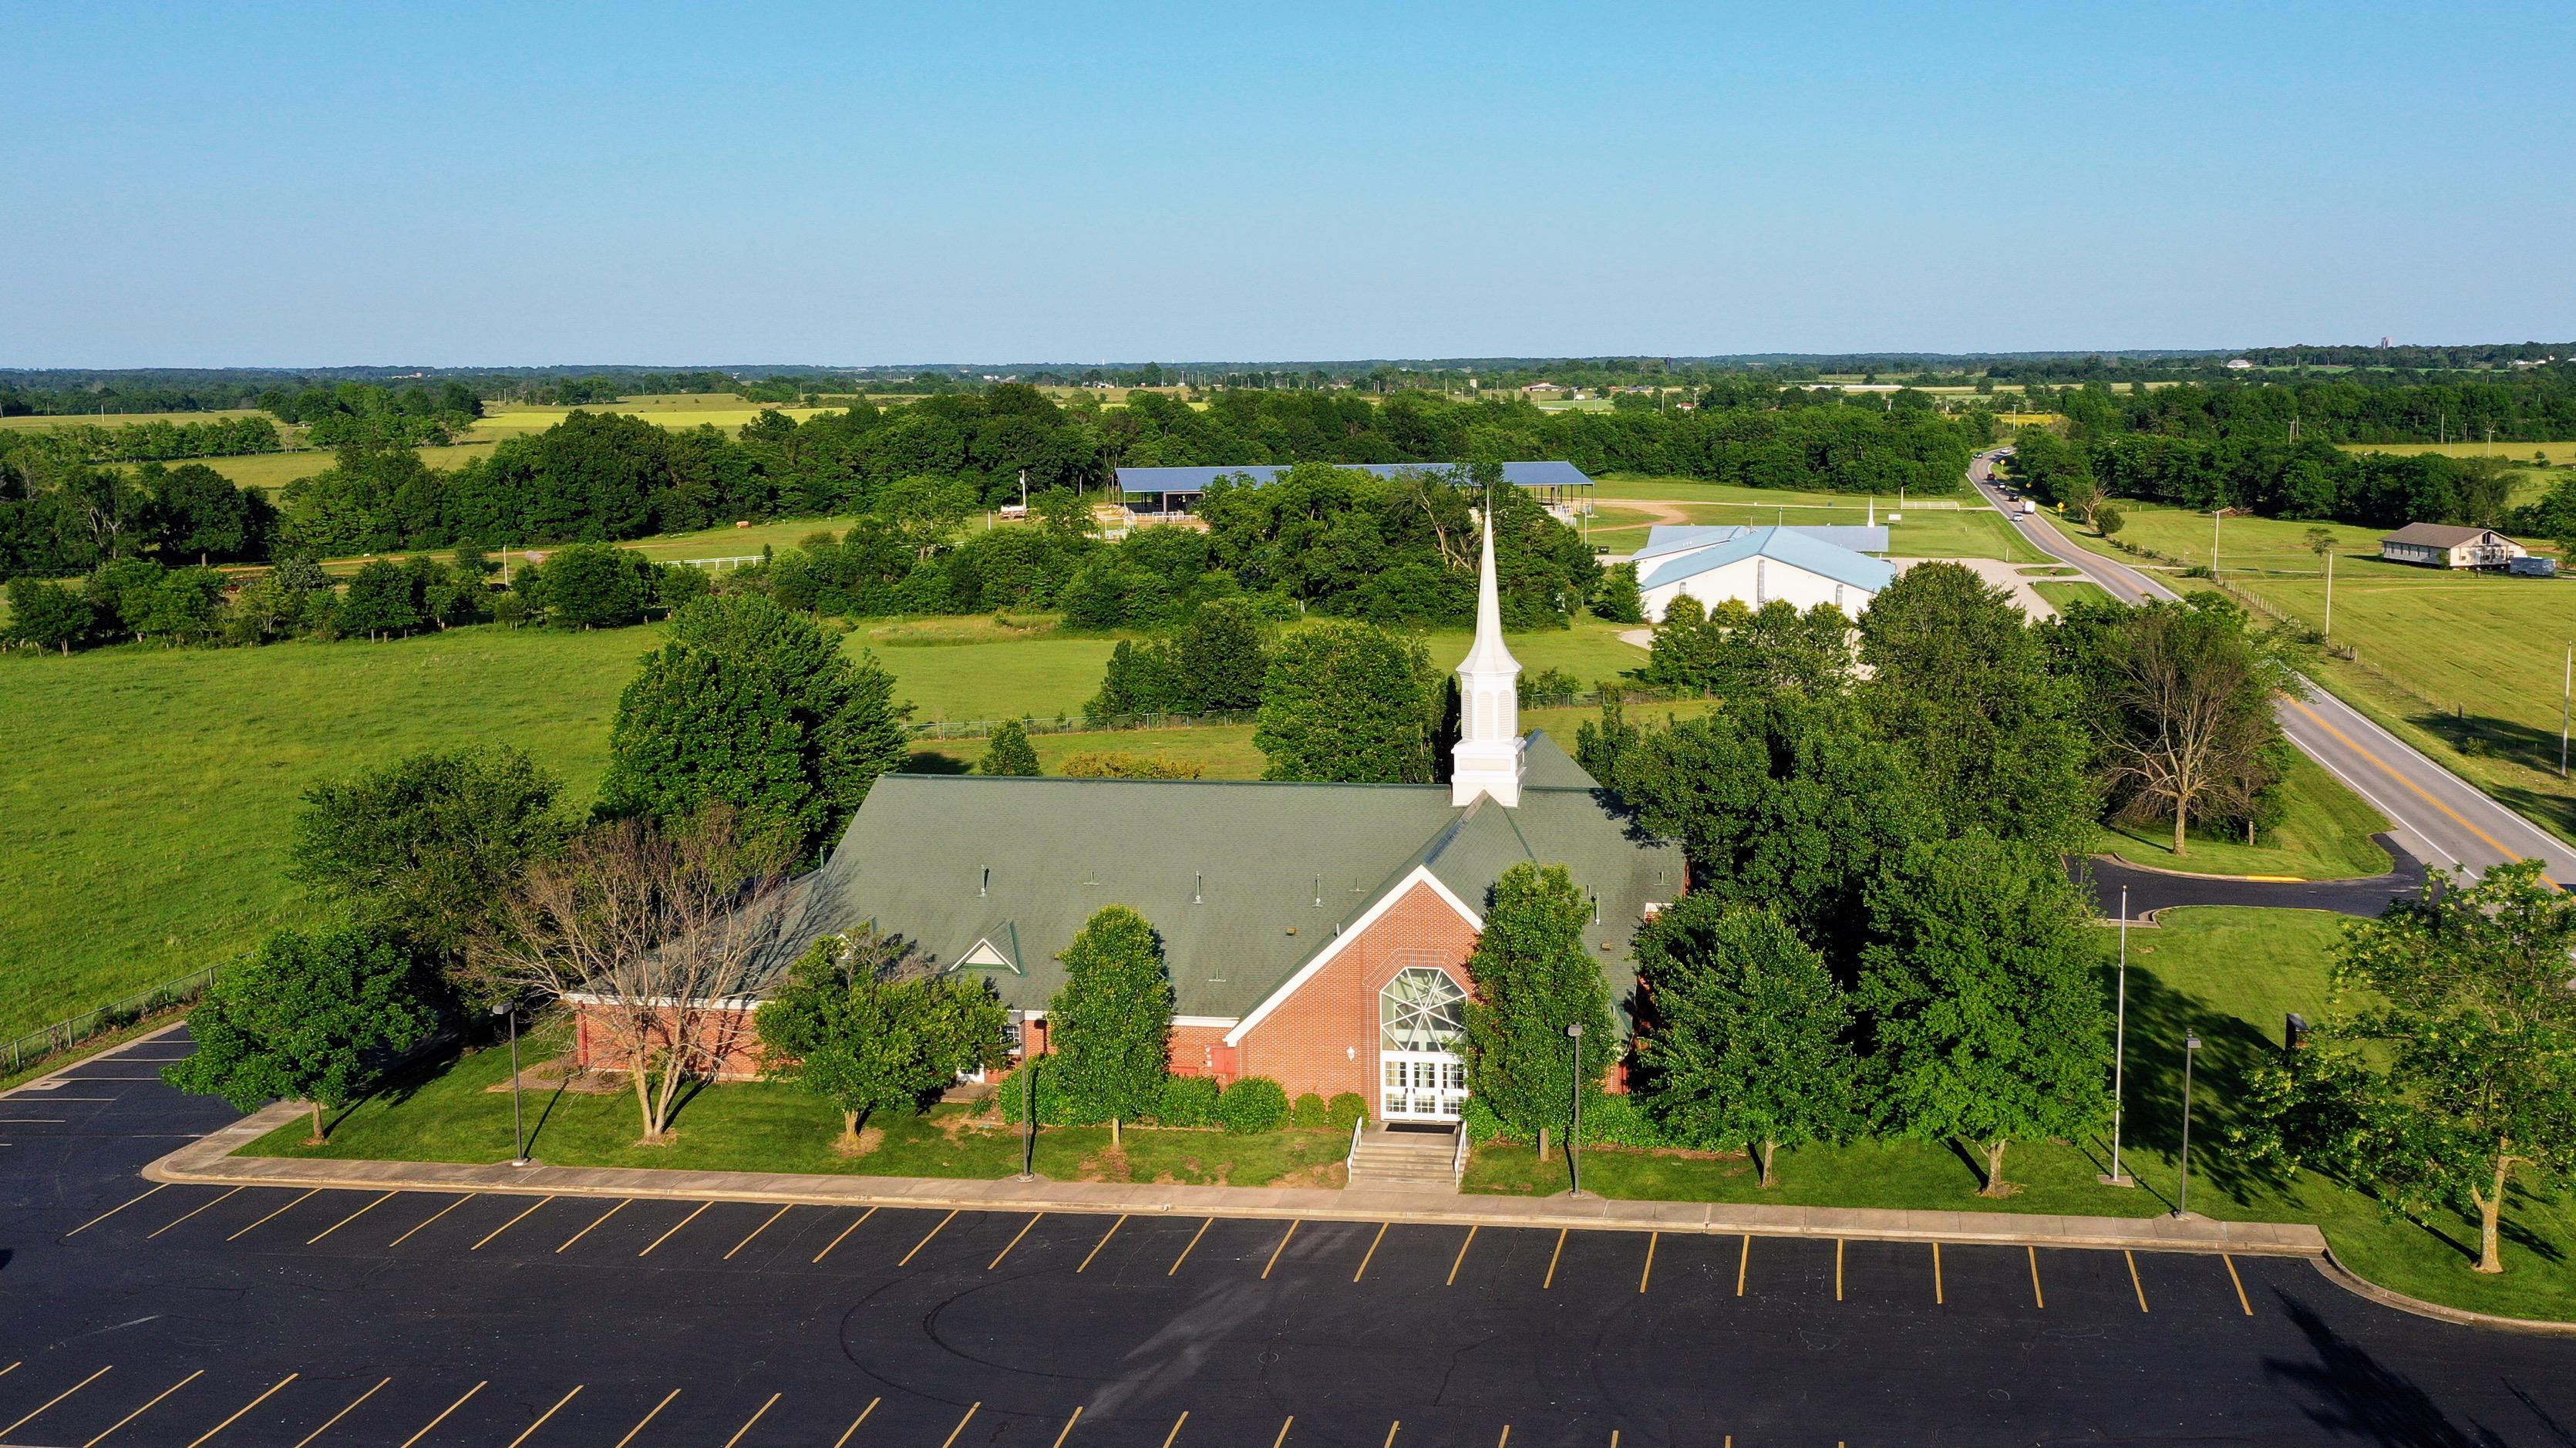 Photo of The Church of Jesus Christ of Latter-day Saints located in Aurora, Missouri exterior.